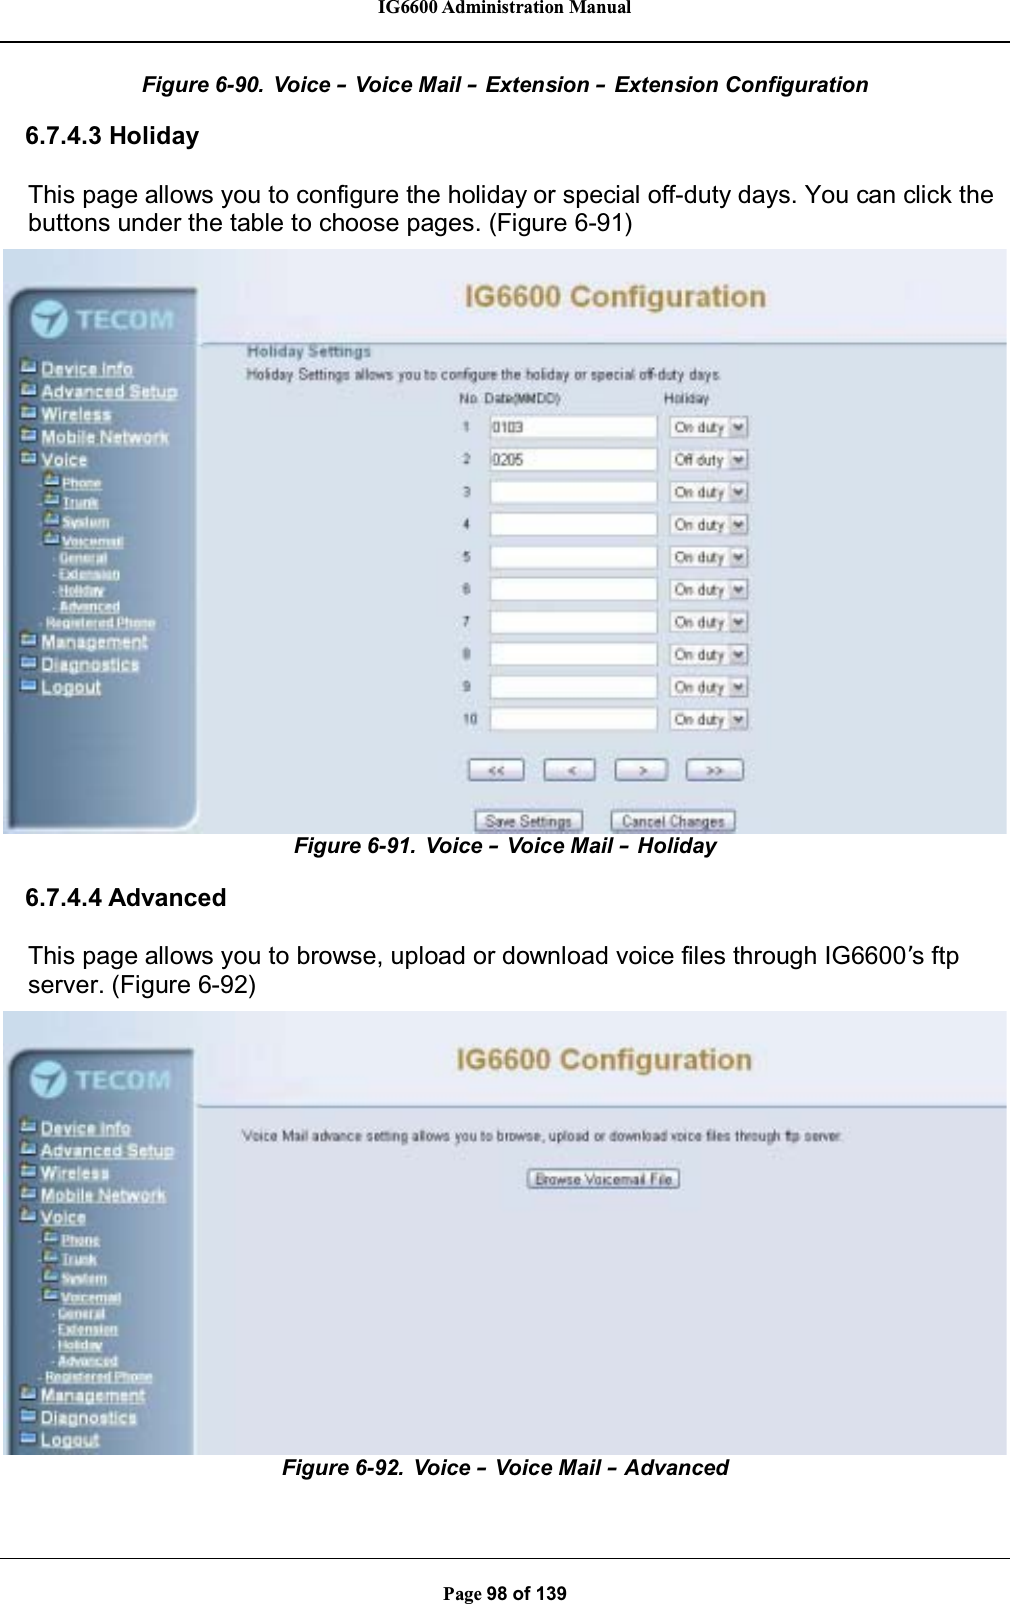 IG6600 Administration ManualPage 98 of 139Figure 6-90. Voice –Voice Mail –Extension –Extension Configuration6.7.4.3 HolidayThis page allows you to configure the holiday or special off-duty days. You can click thebuttons under the table to choose pages. (Figure 6-91)Figure 6-91. Voice –Voice Mail –Holiday6.7.4.4 AdvancedThis page allows you to browse, upload or download voice files through IG6600’s ftpserver. (Figure 6-92)Figure 6-92. Voice –Voice Mail –Advanced